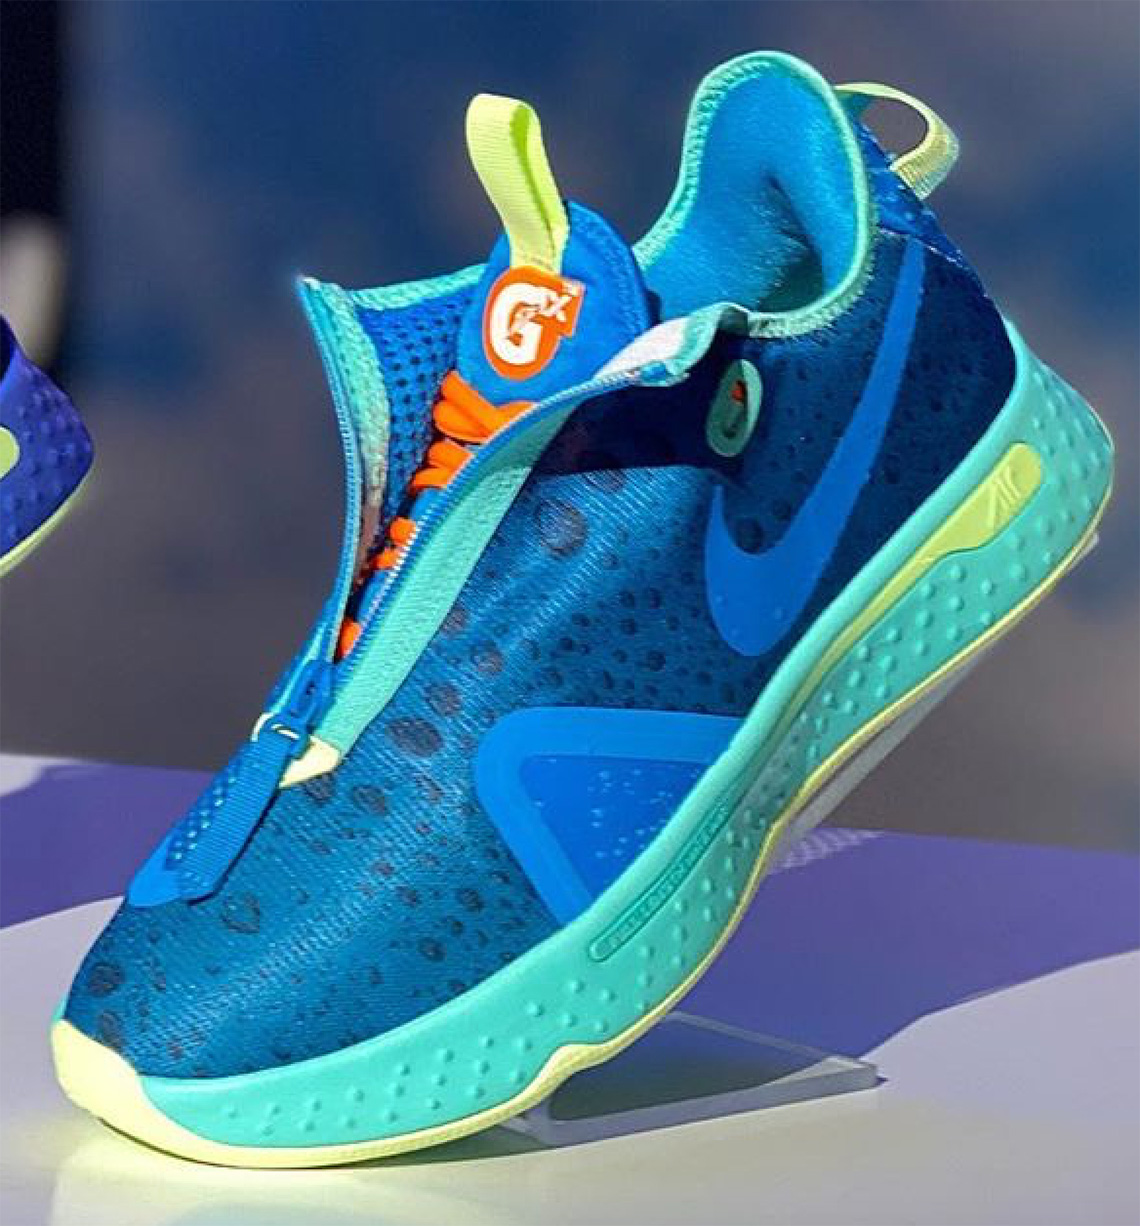 Nike & Gatorade Partner With Paul George on New PG4 Collaboration